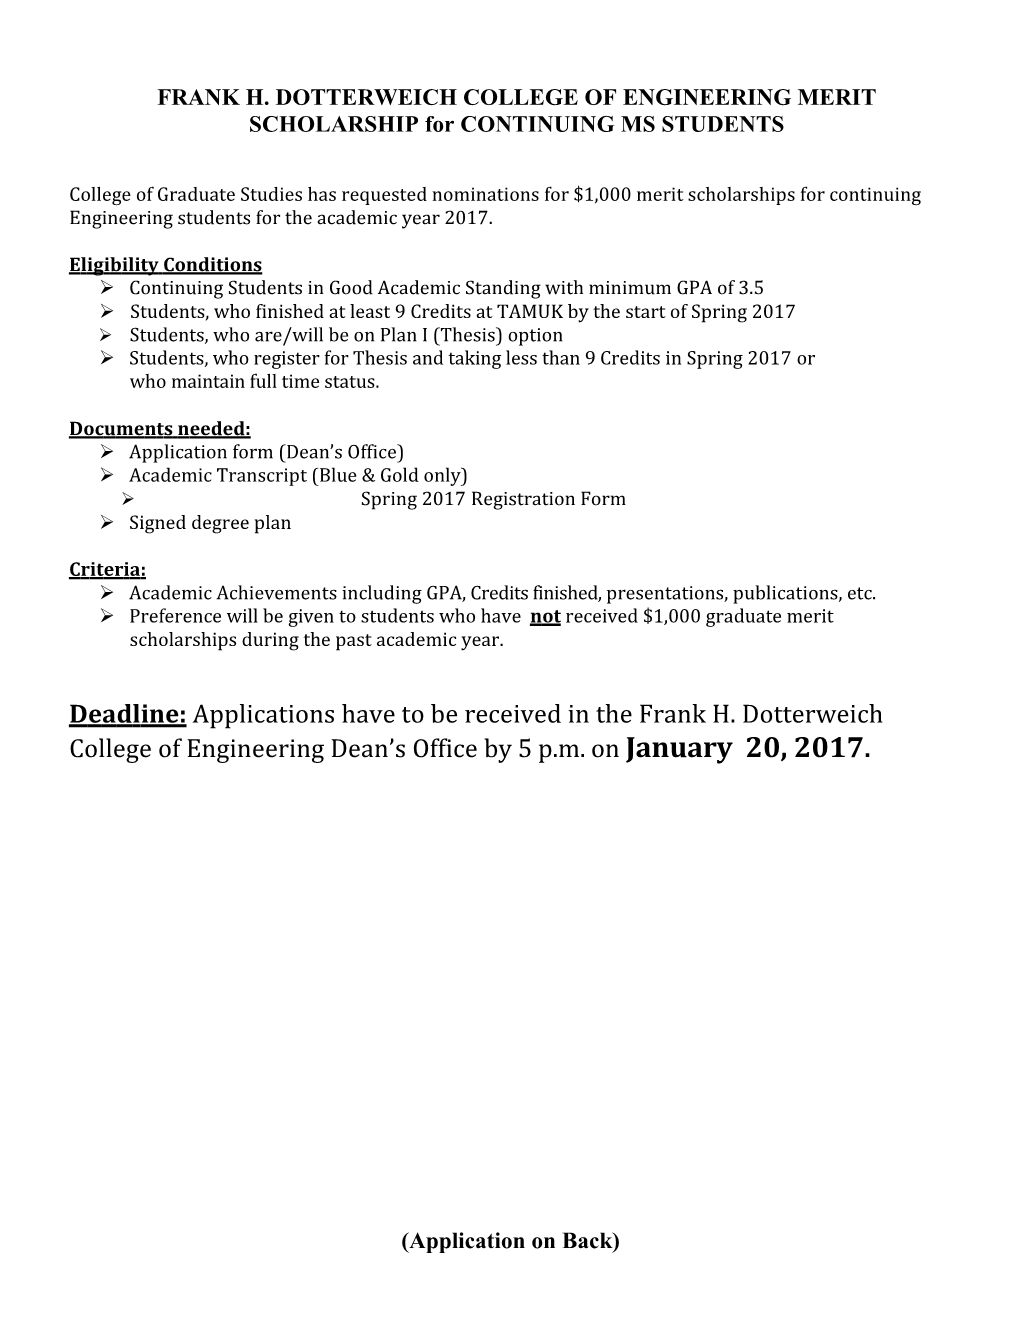 FRANK H. DOTTERWEICH COLLEGE of ENGINEERING MERIT SCHOLARSHIP for CONTINUING MS STUDENTS